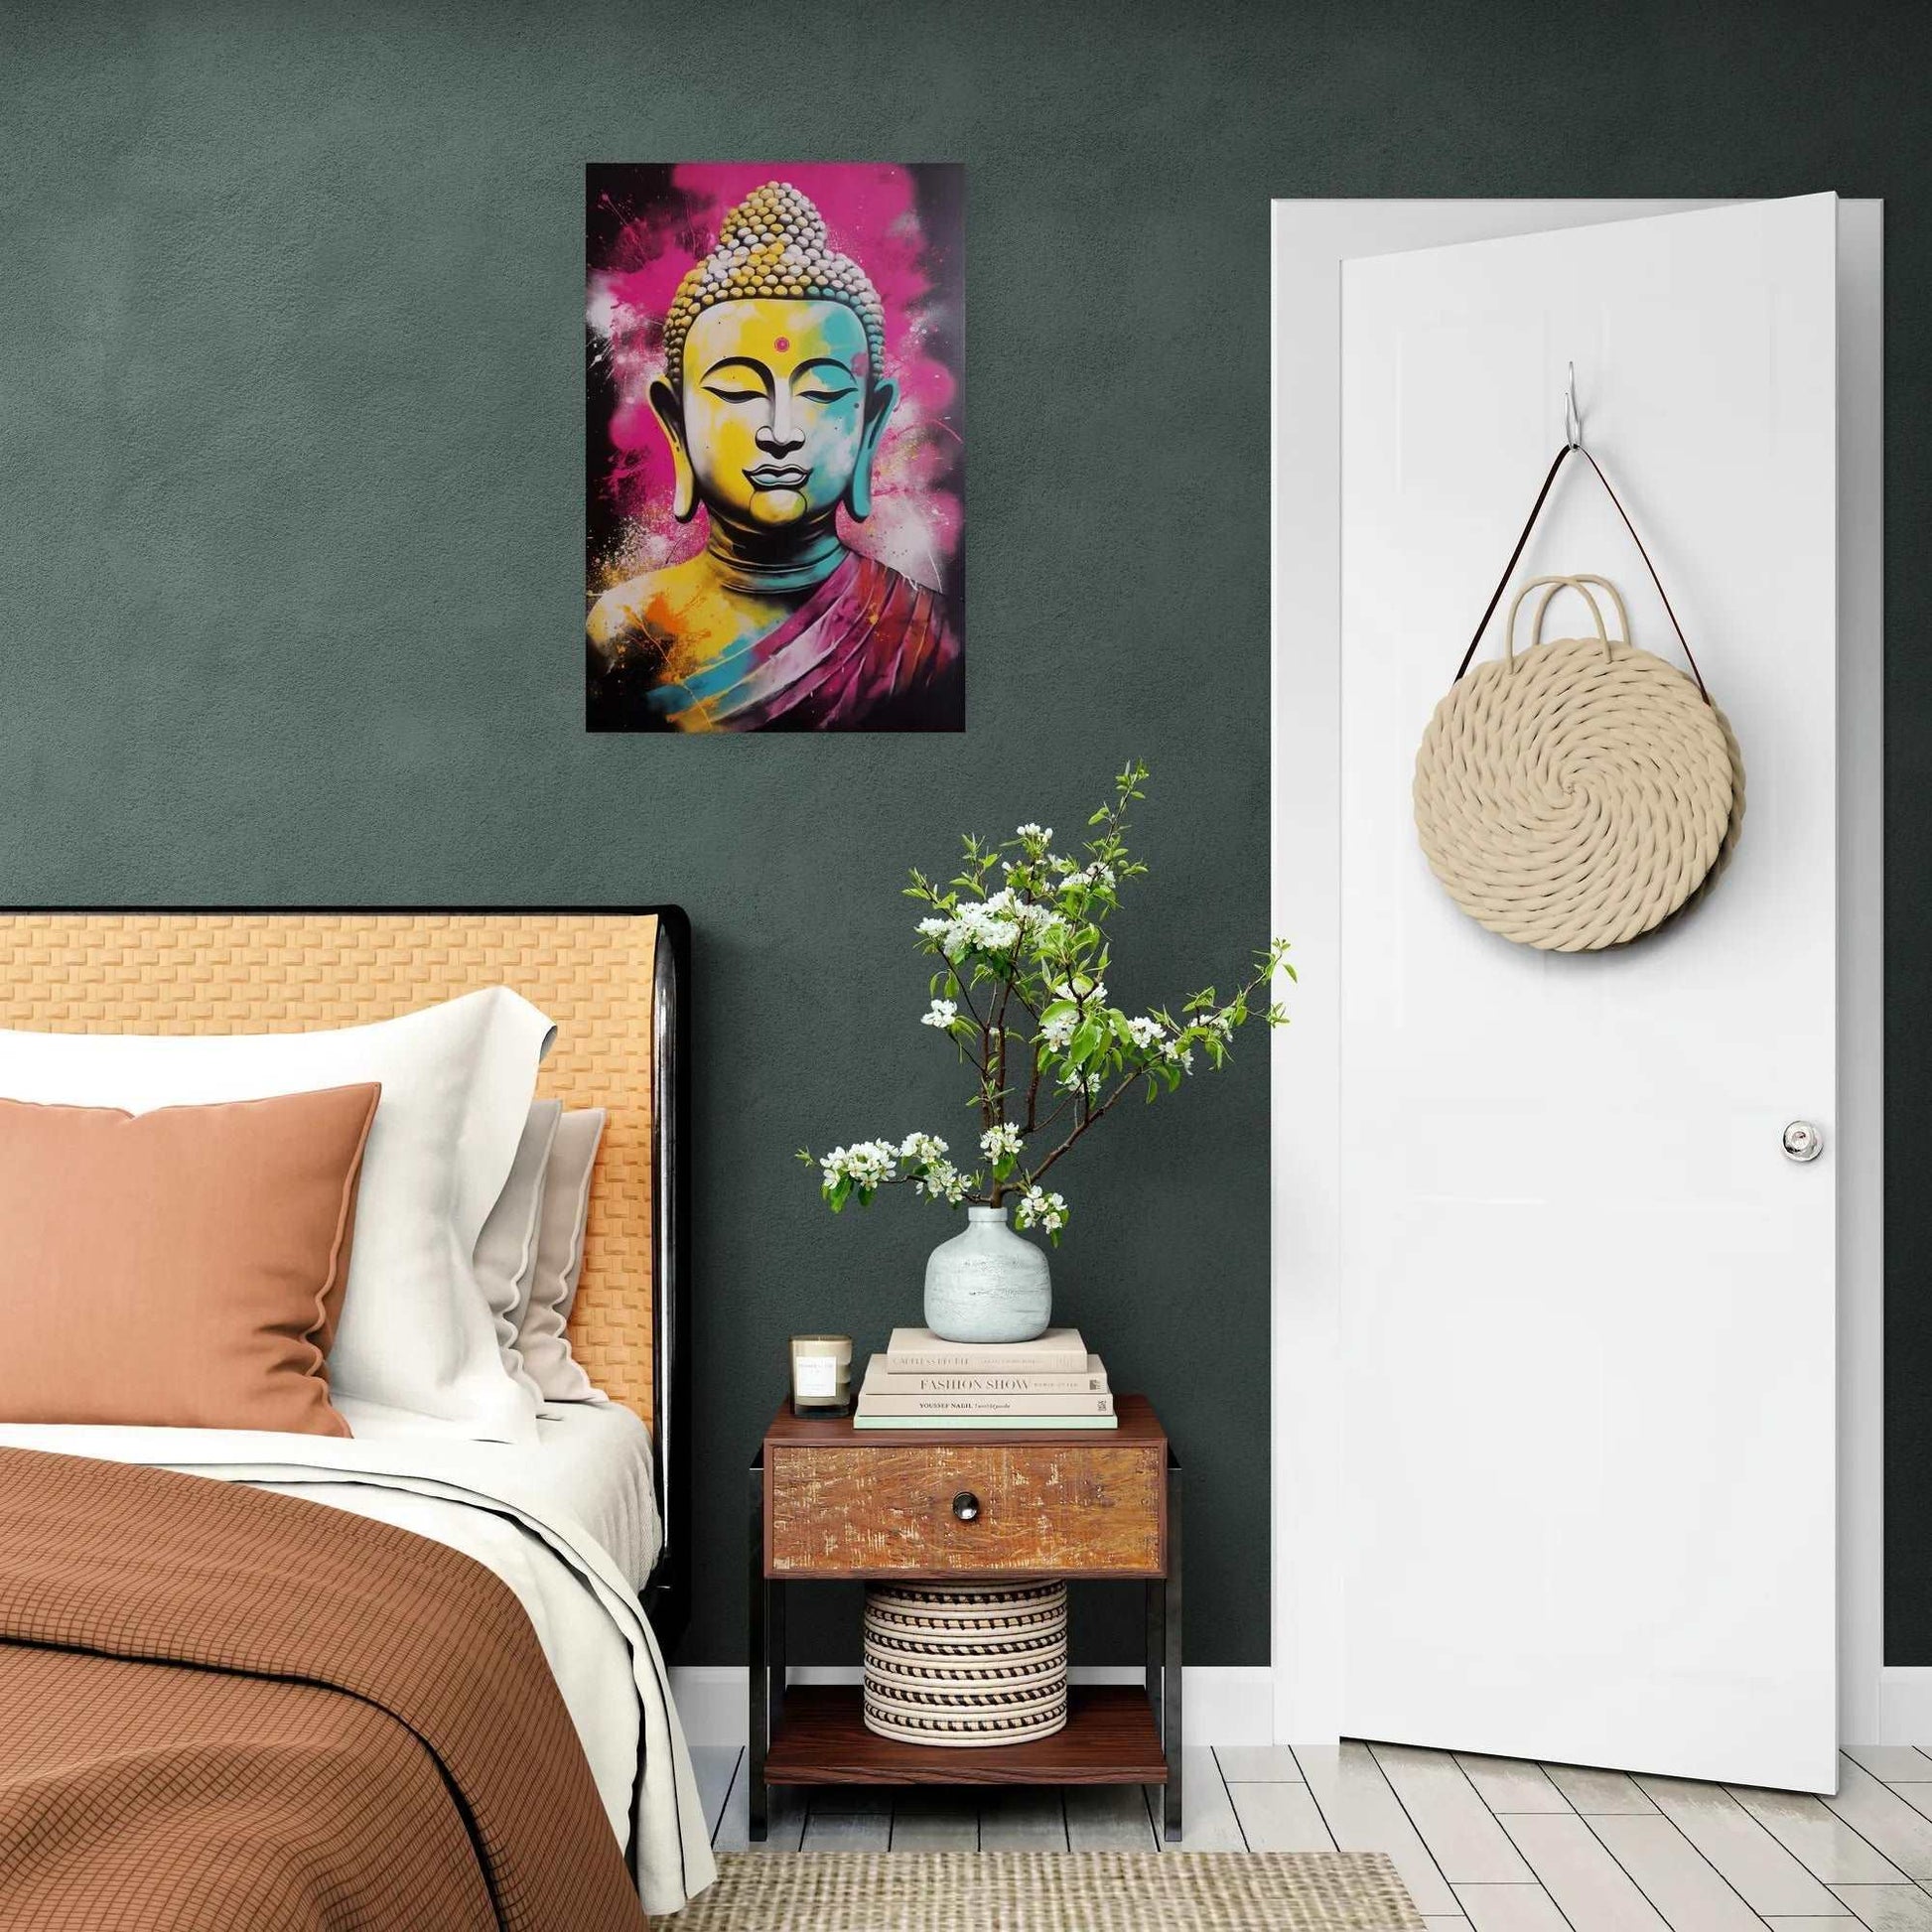 A colorful Buddha artwork adorning a dark green wall in a bedroom, adding an artistic and serene presence next to a rustic nightstand with fresh flowers.